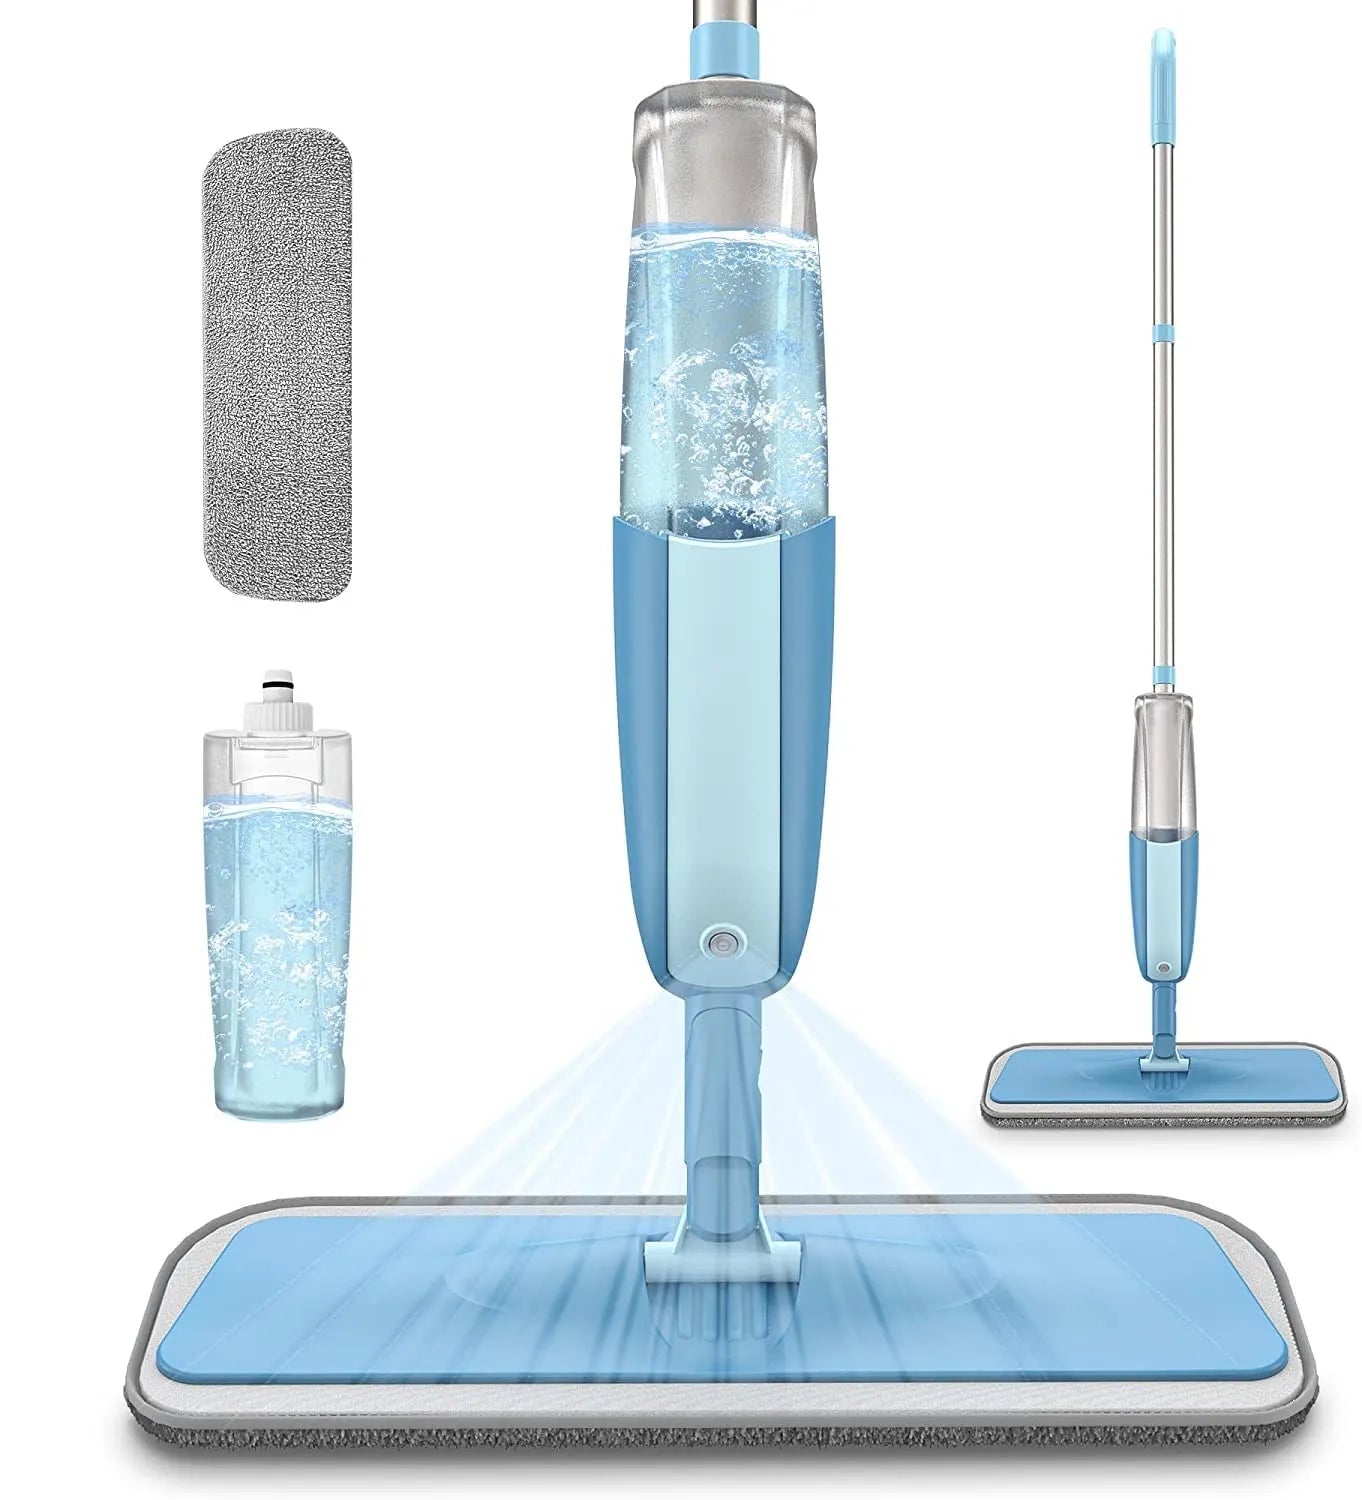 Stainless Steel Microfiber Floor Cleaning Spray Mop with Removable Washable Cleaning Pad and Integrated Water Spray Mechanism,360 Degree Easy Floor Cleaning (MULTICOLOUR)